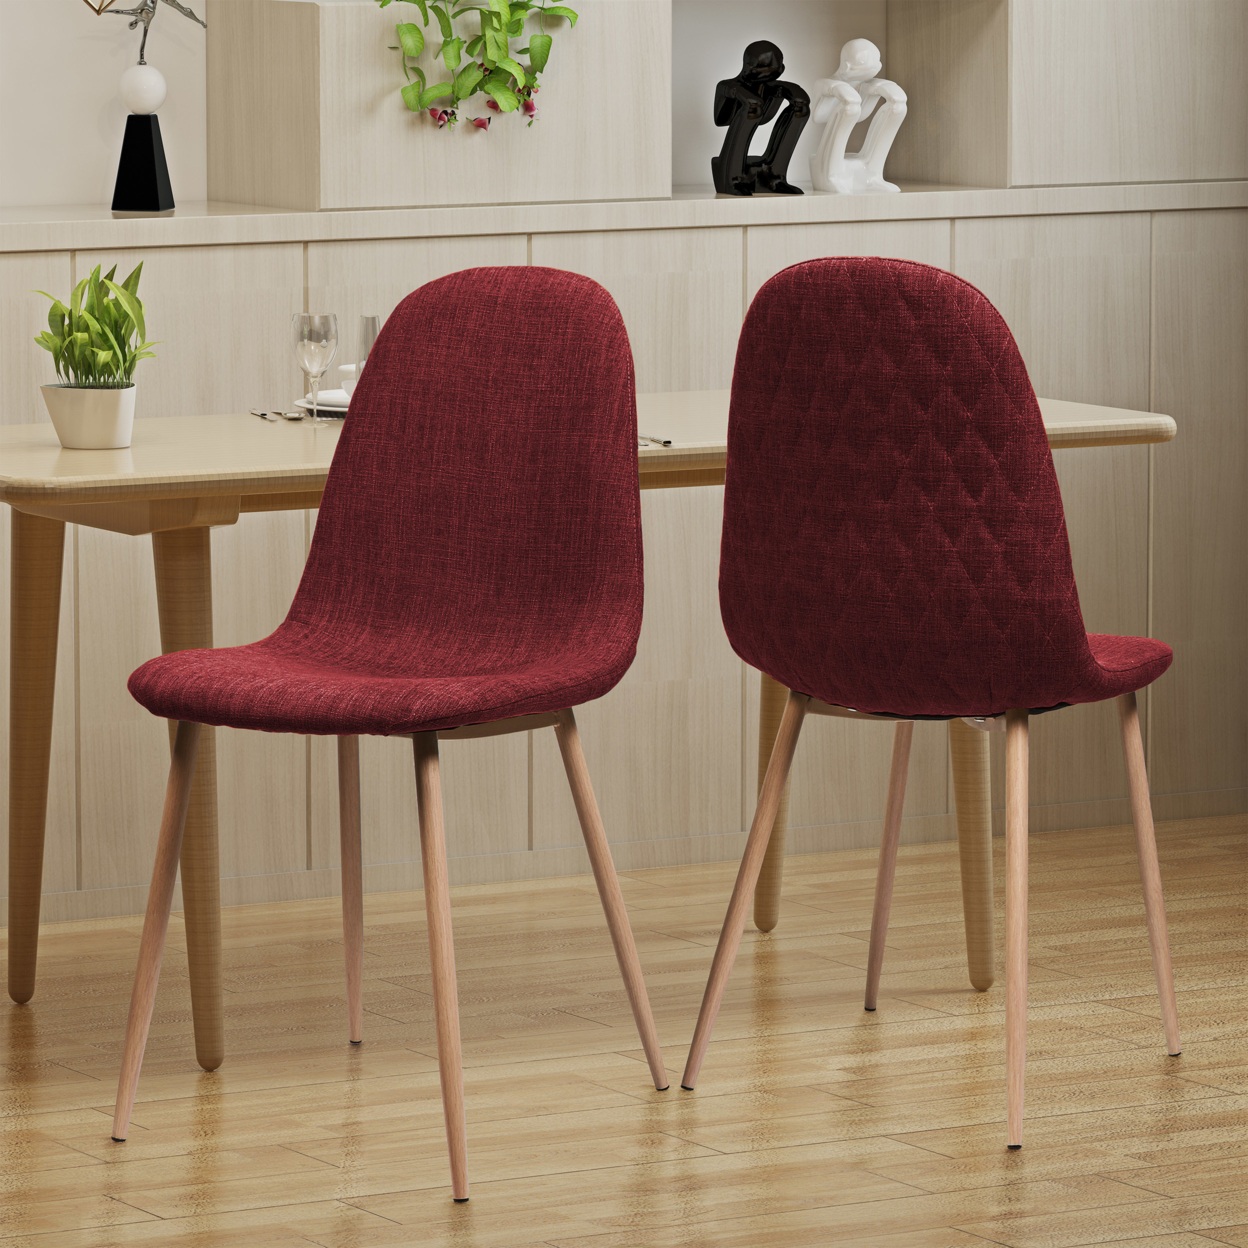 Camden Mid Century Fabric Dining Chairs With Wood Finished Legs - Set Of 2 - Red/Light Walnut